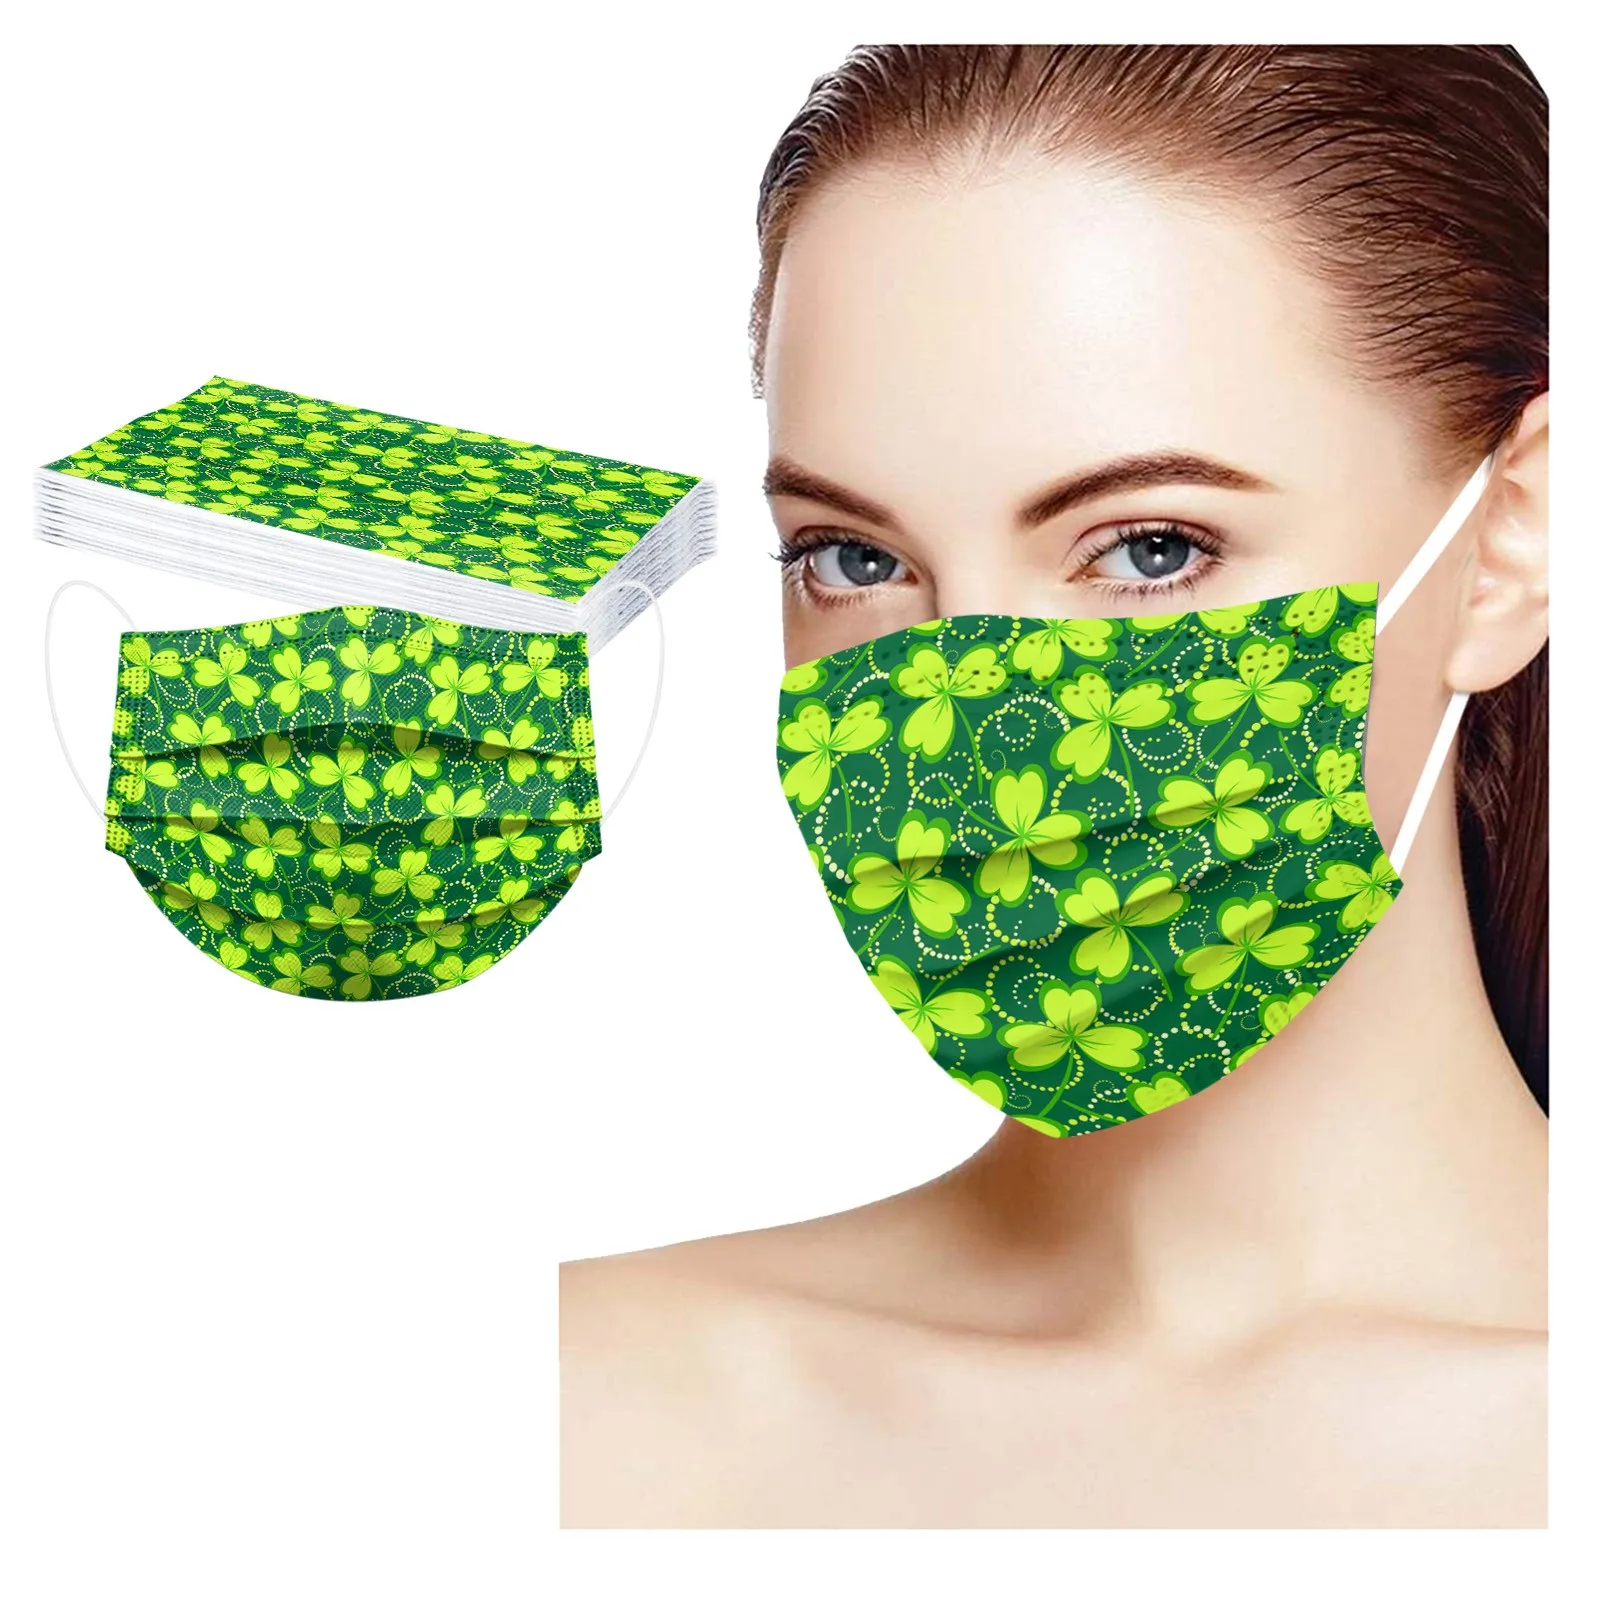 

50pcs Adult Cotton Maskst. Patrick' Day Disposable Face Mask 3 Ply Earloop Anti-pm2.5 Masks Forface mascarillas